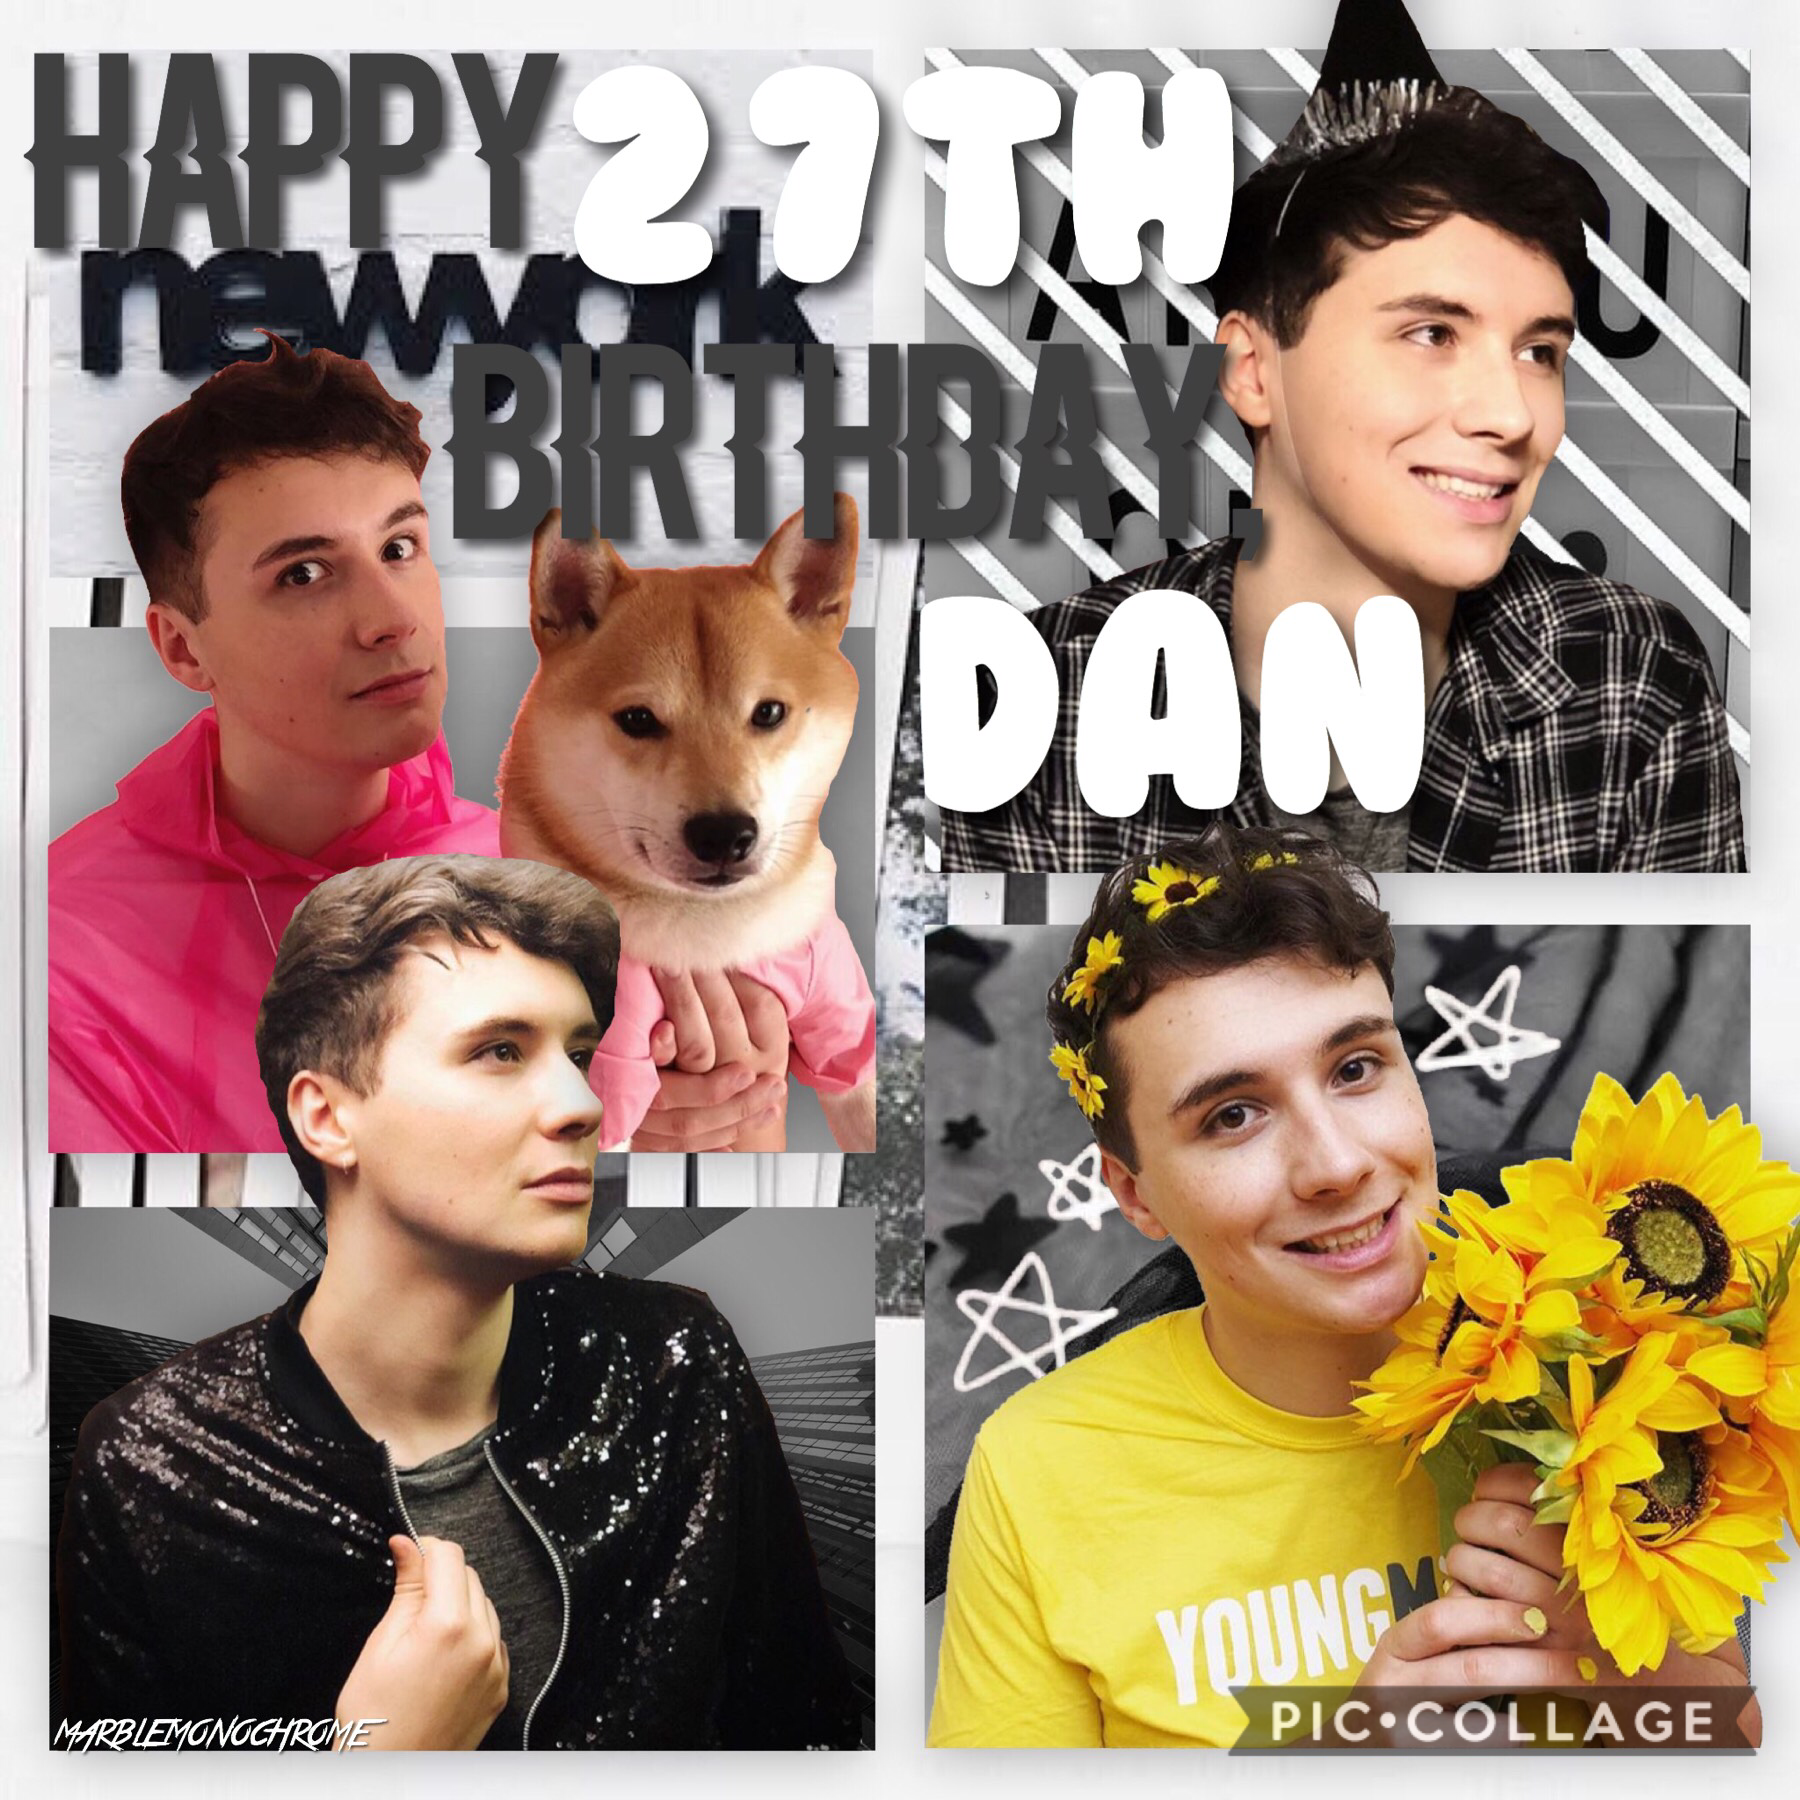 Happy 27th Birthday Dan.

You’re a year closer to d**th and I’ve now become jealous of that fact